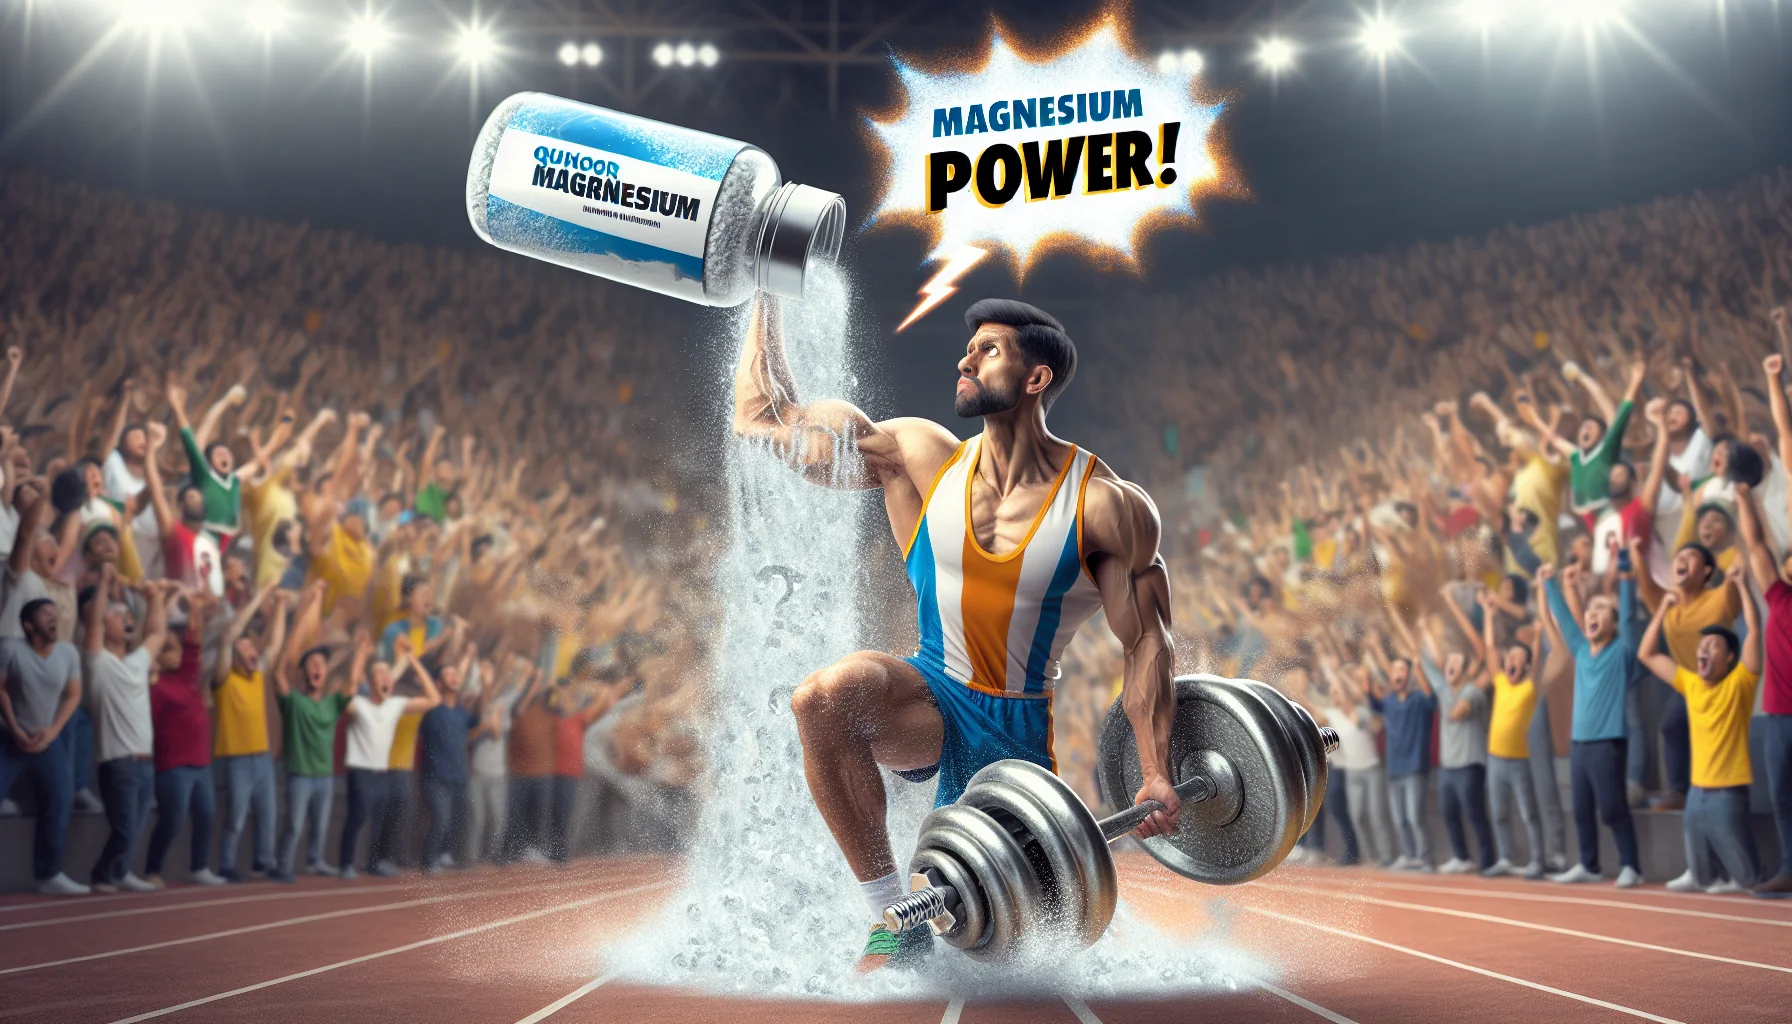 Generate a humorously realistic image of a seemingly supercharged athlete, of South Asian descent, profusely sweating magnesium droplets, representing Qunol magnesium. The scene takes place in a jam-packed sports arena with cheering spectators. This athlete is in the midst of performing an improbable sports feat, like lifting an oversized dumbbell with just one hand, to signify the strength and enhancement provided by the supplements. A dynamic, cartoony text bubble proclaims, 'Magnesium Power!' floating above the athlete's head. Use bright and bold colors to make the image visually interesting and engaging.